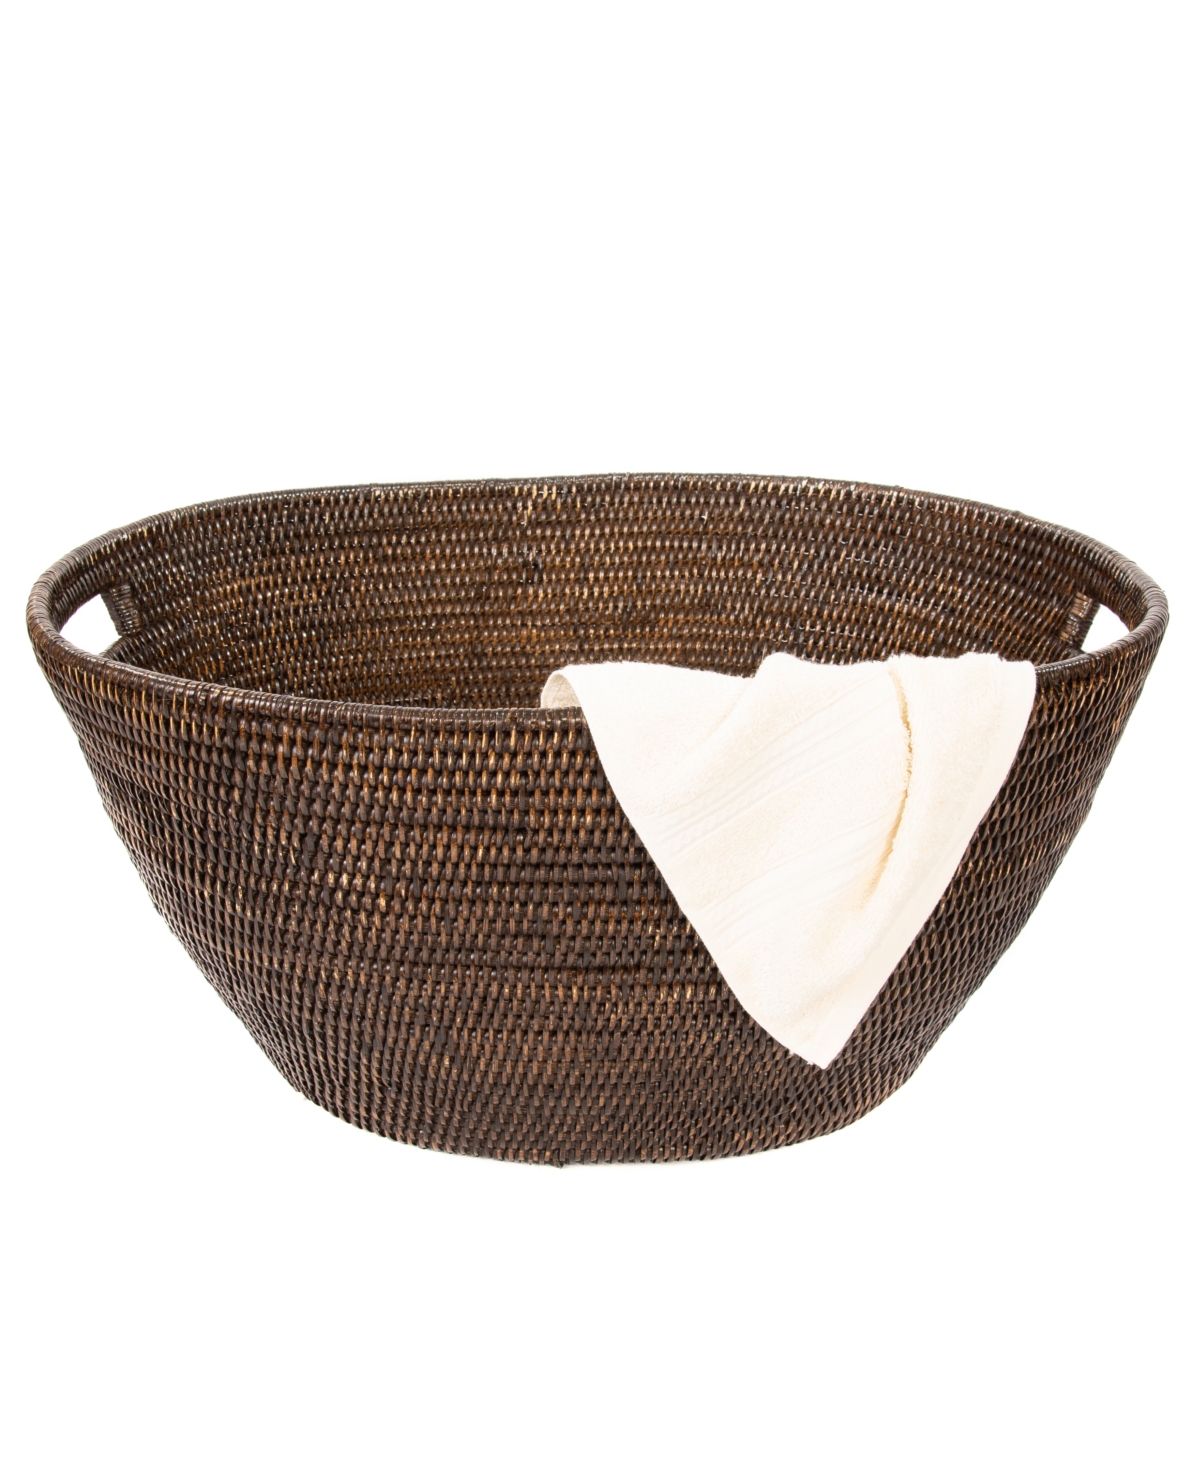 Artifacts Trading Company Artifacts Rattan Laundry Basket In Coffee Bean